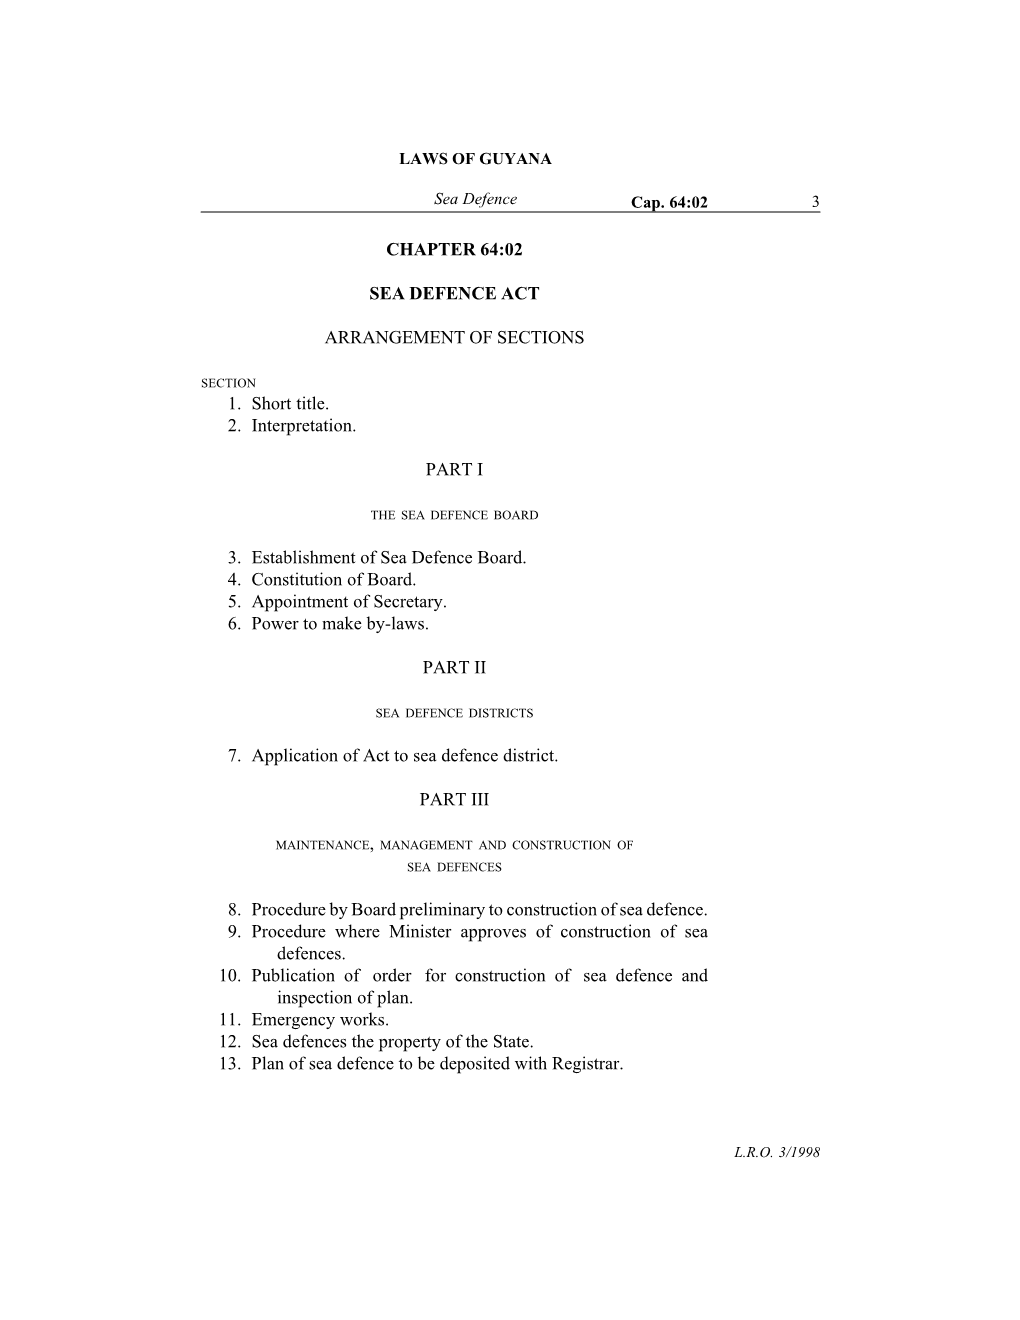 Chapter 64:02 Sea Defence Act Arrangement of Sections 1